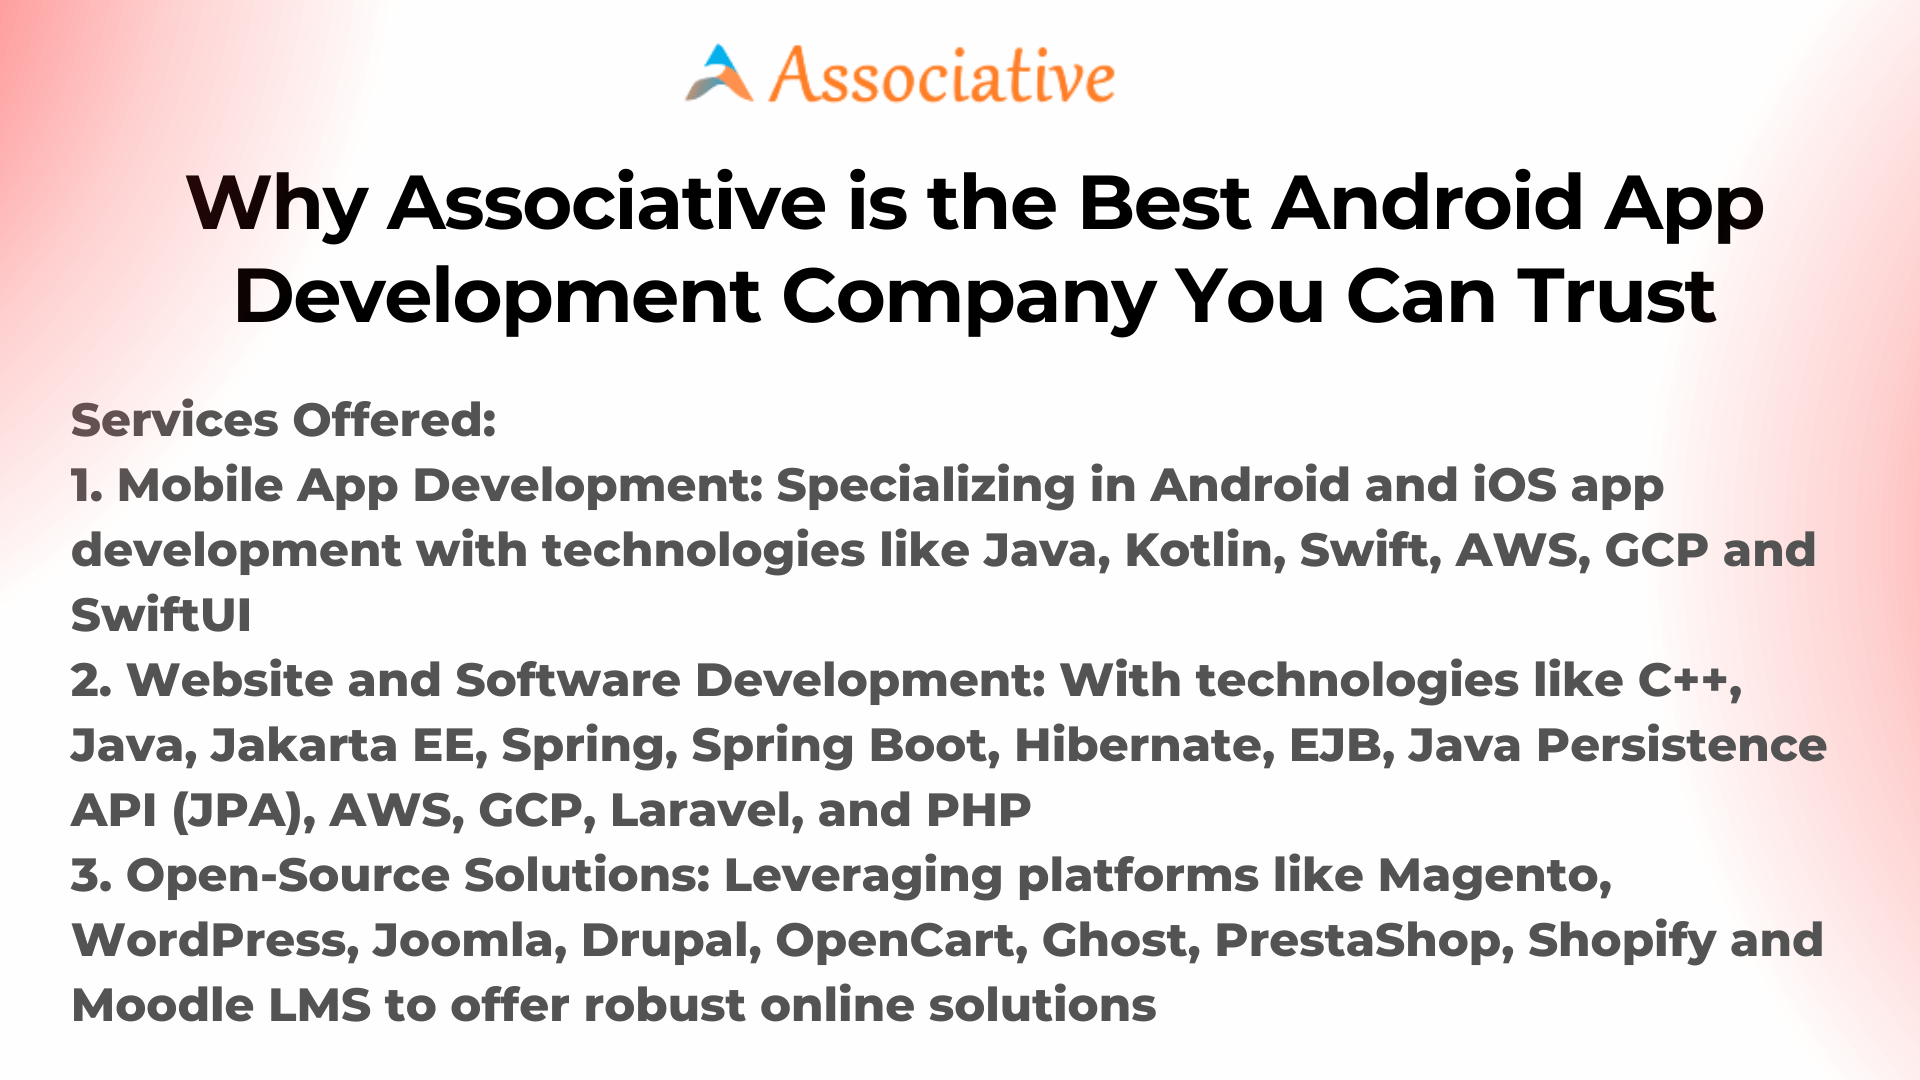 Why Associative is the Best Android App Development Company You Can Trust